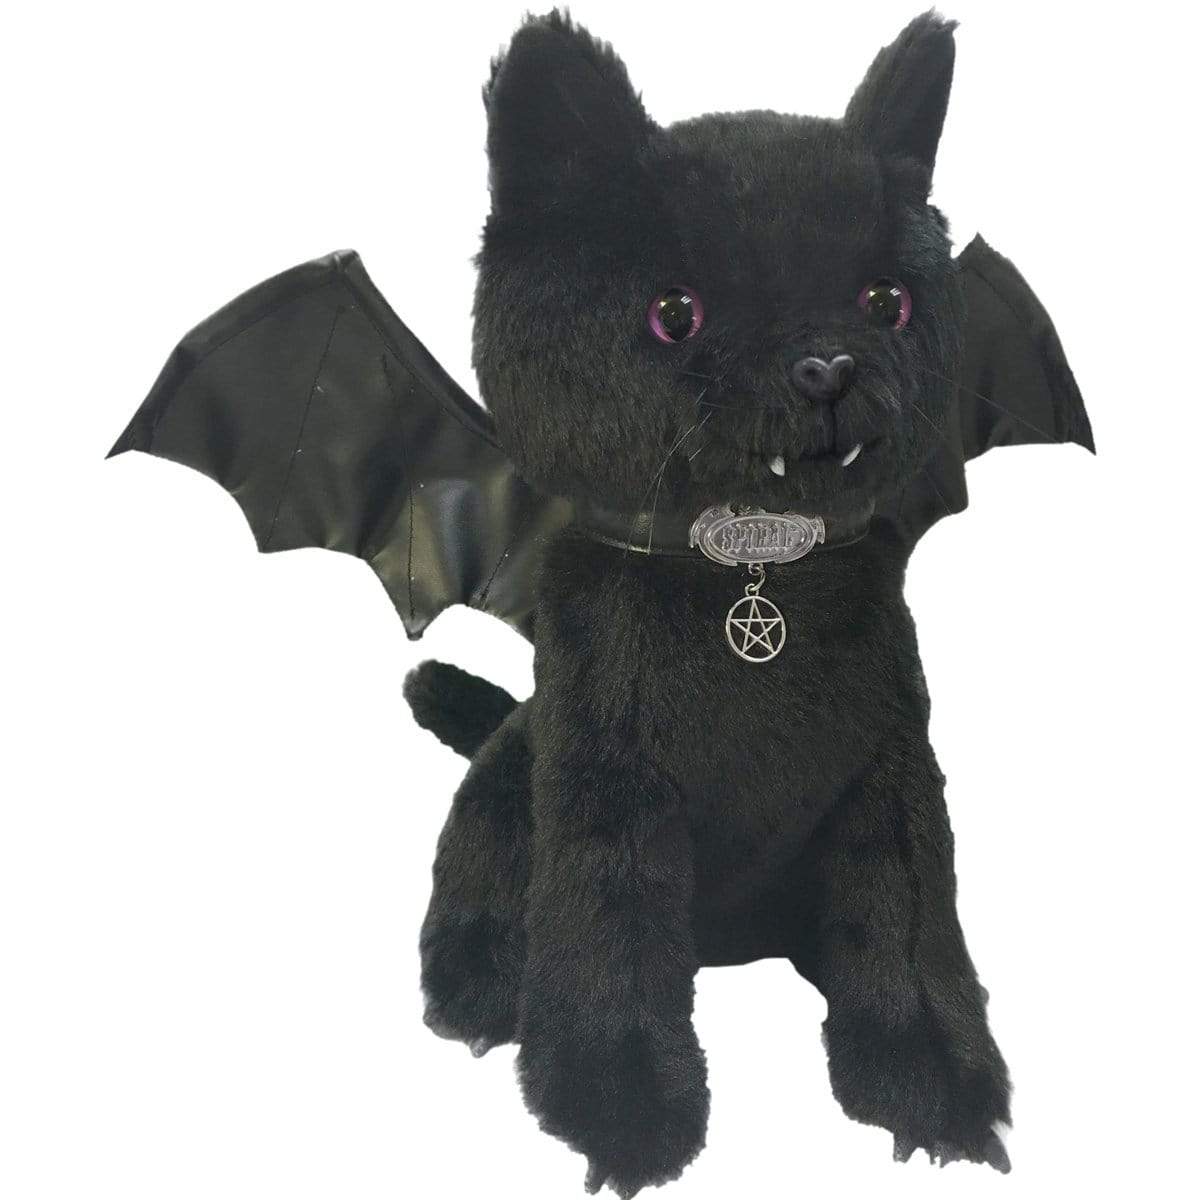 BAT CAT - Winged Collectable Soft Plush Toy 12 inch - Spiral USA